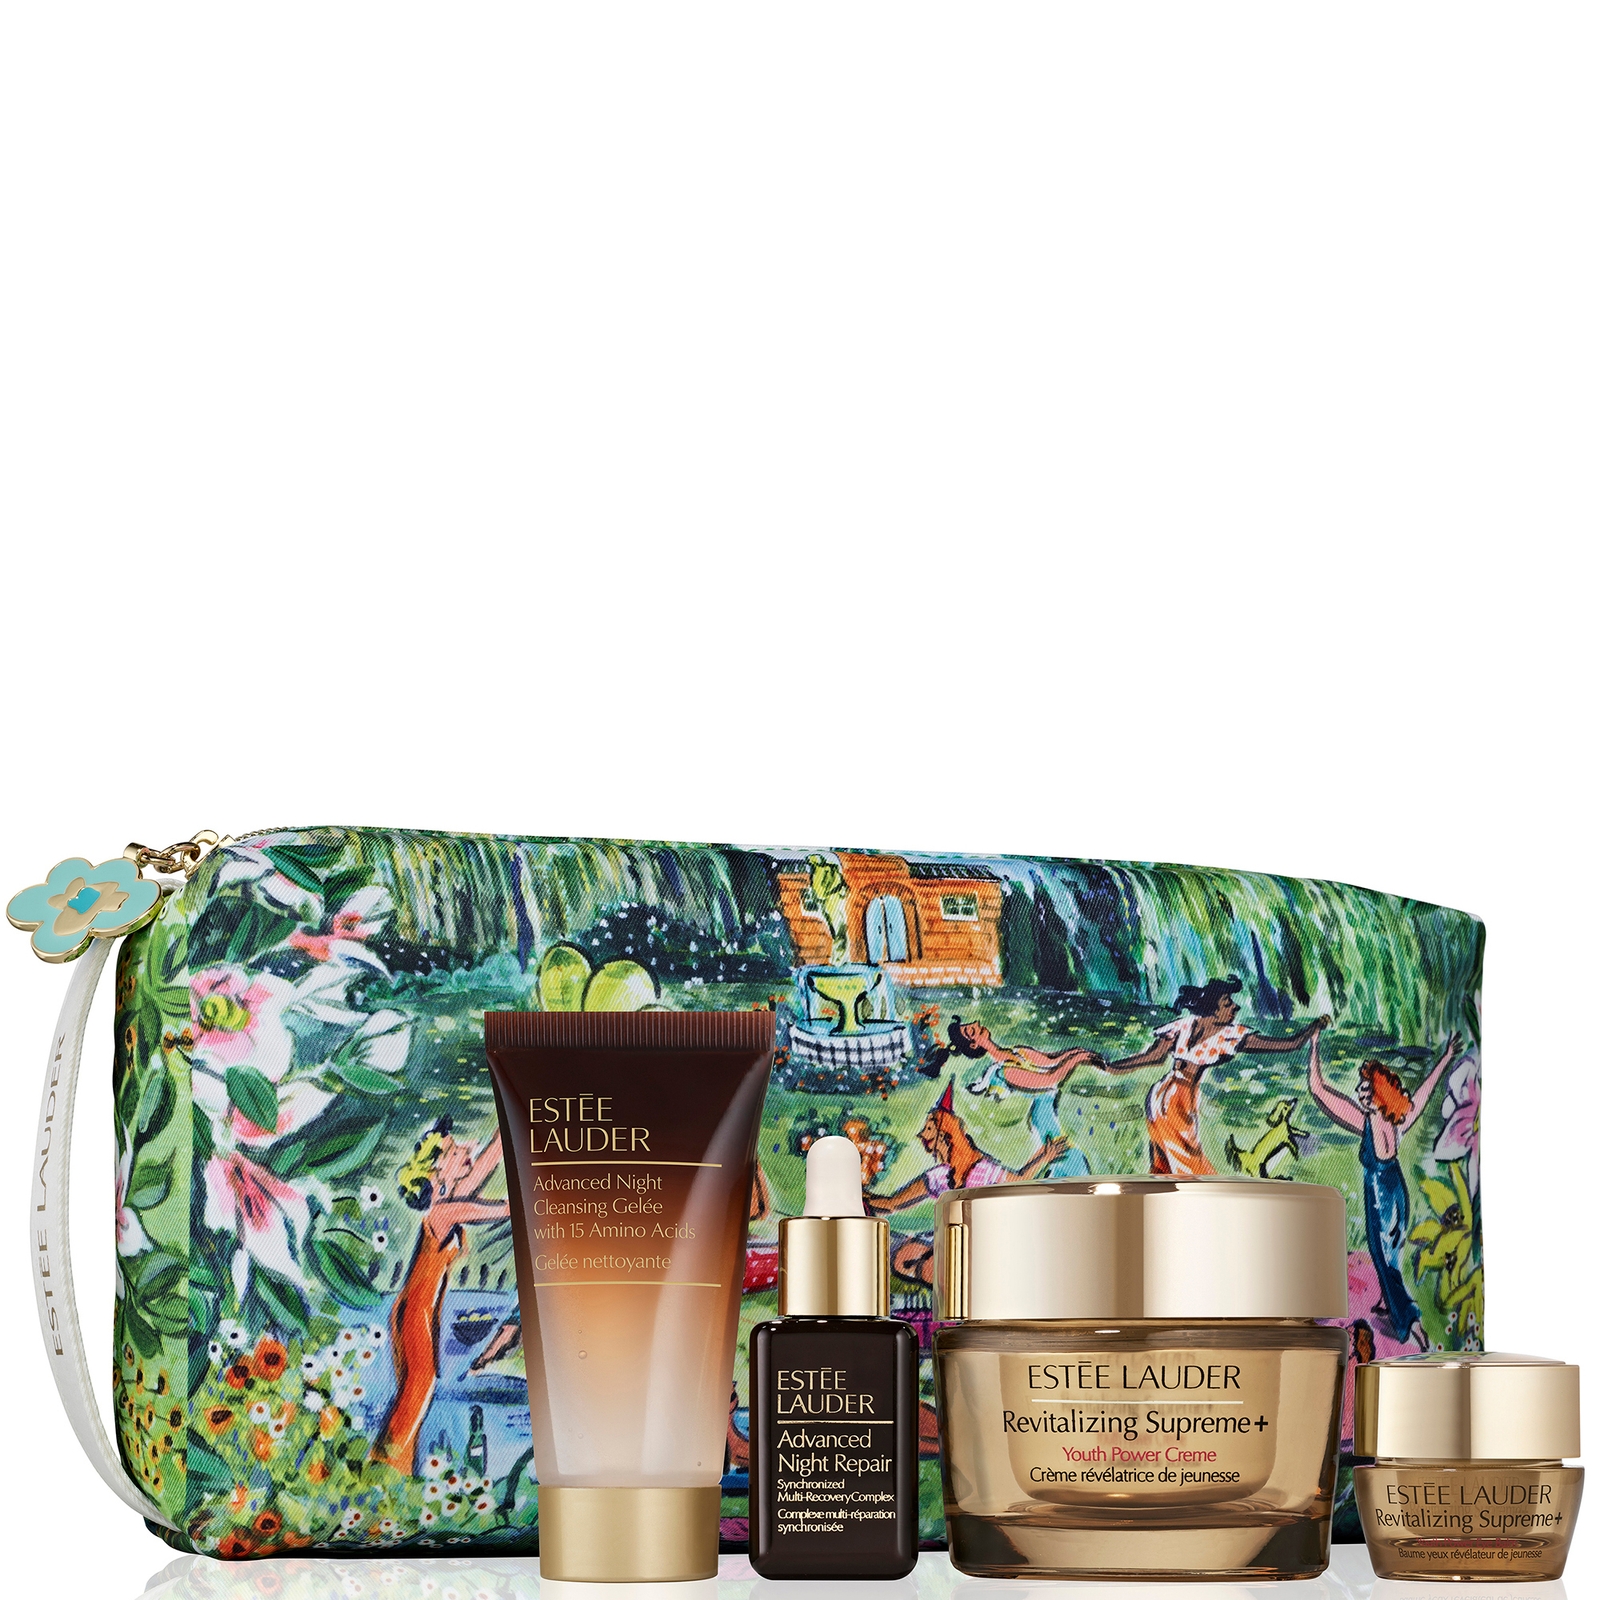 Estee Lauder Firming + Lifting Routine 4-Piece Gift Set (Worth over PS125)